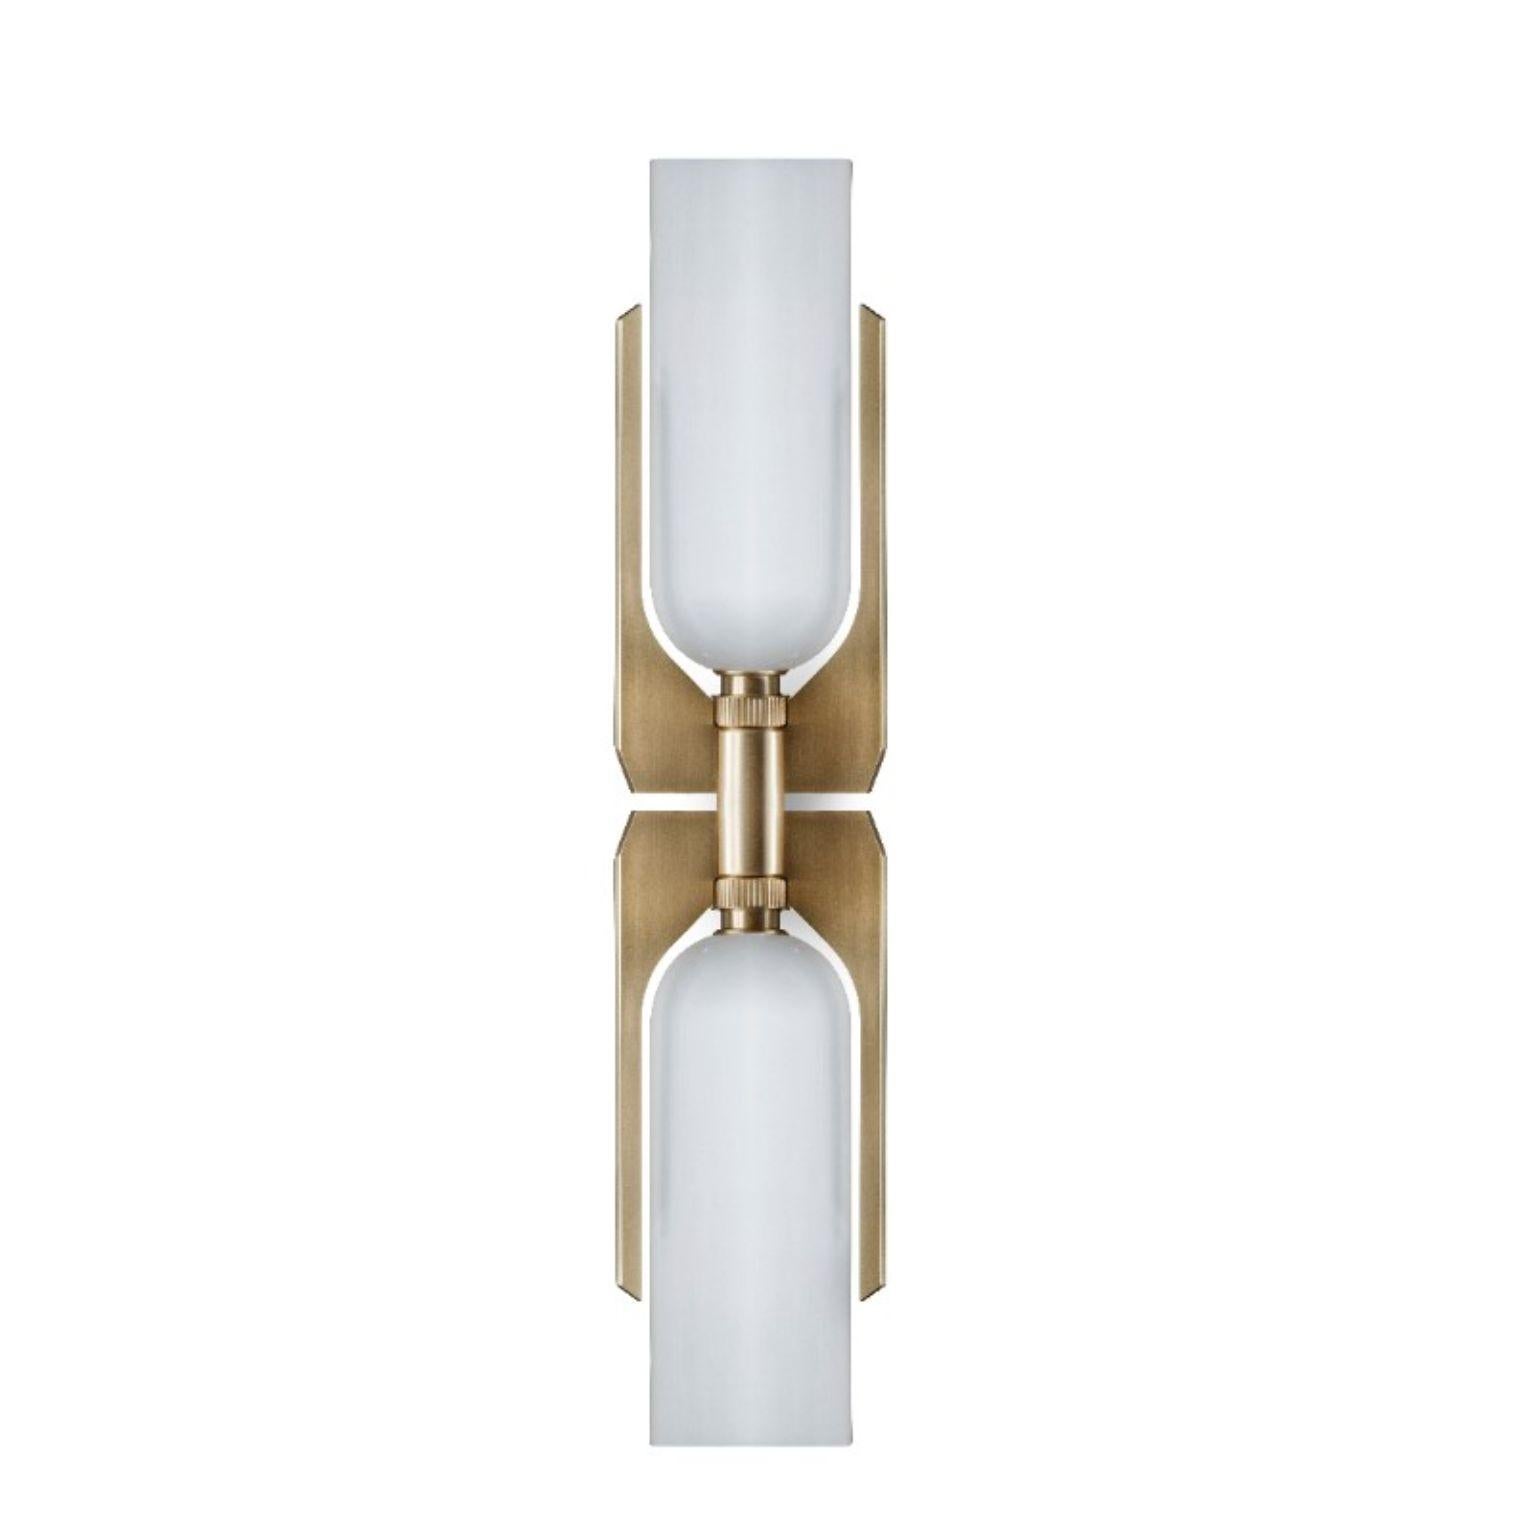 Pennon wall light - Brass by Bert Frank
Dimensions: 62.6 x 13.4 x 6 cm
Materials: Brass, Bone China

When Adam Yeats and Robbie Llewellyn founded Bert Frank in 2013 it was a meeting of minds and the start of a collaborative creative partnership with